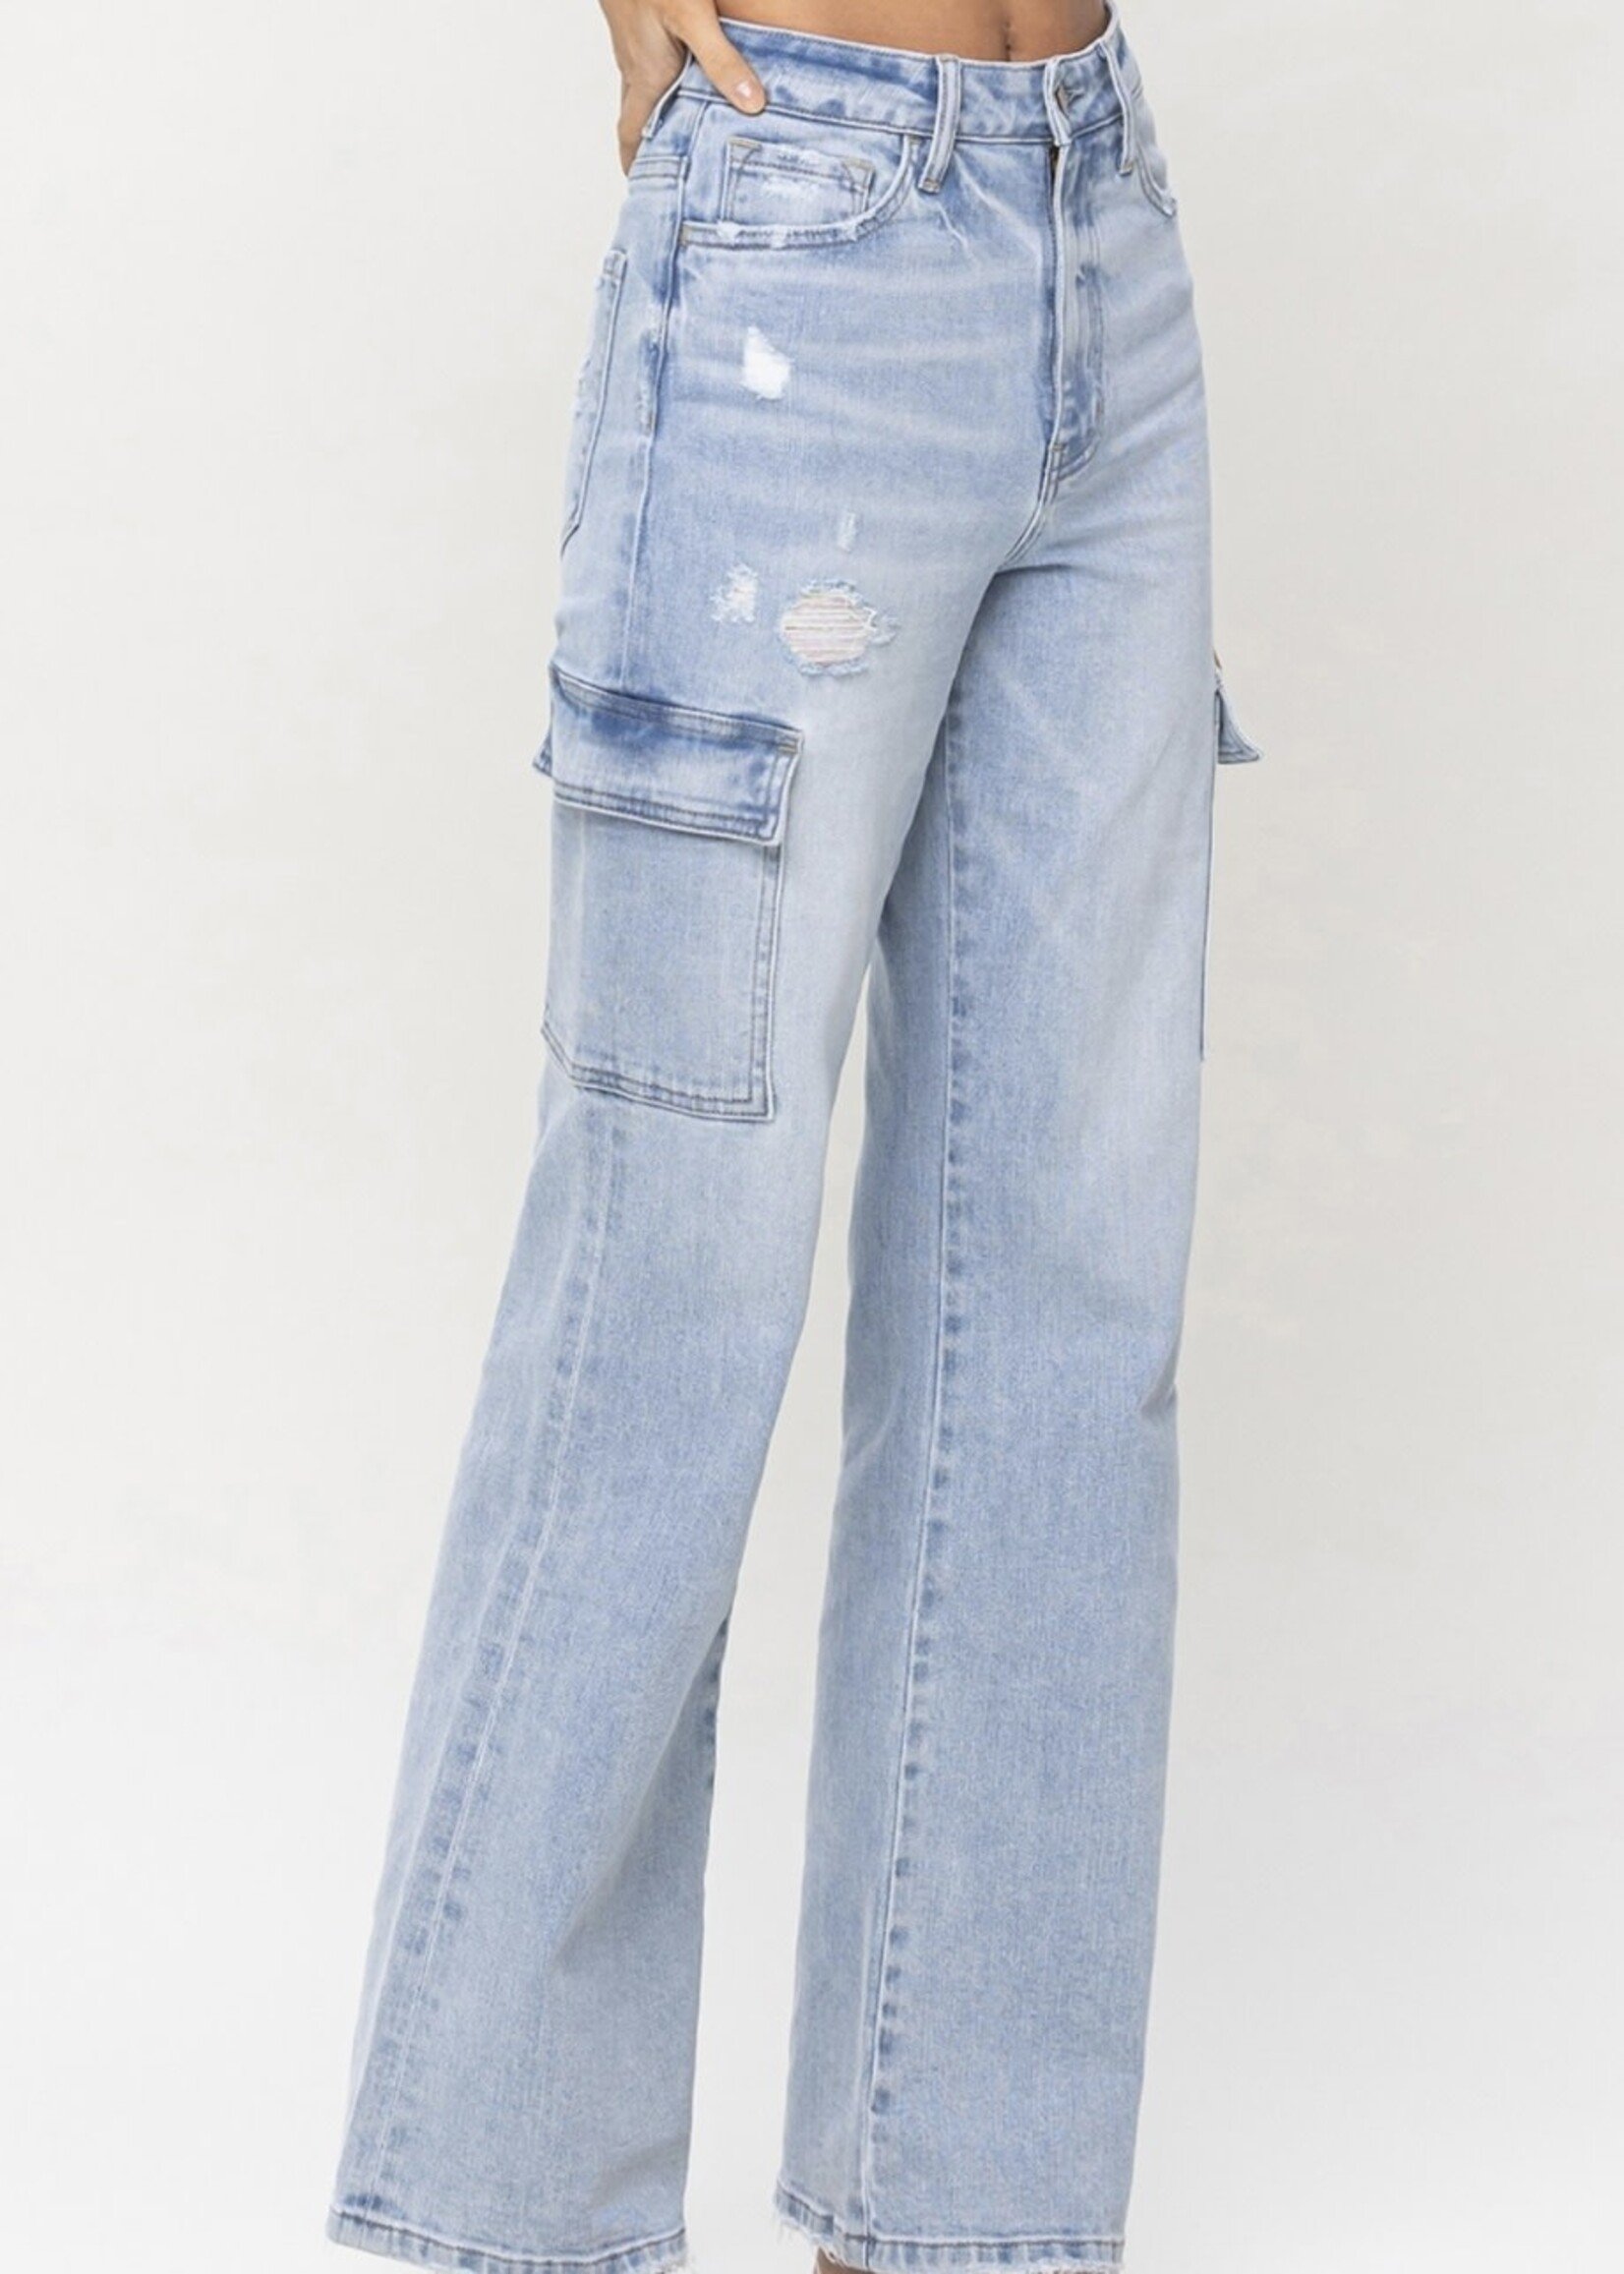 90's Vintage Miles Jeans with Cargo Pockets